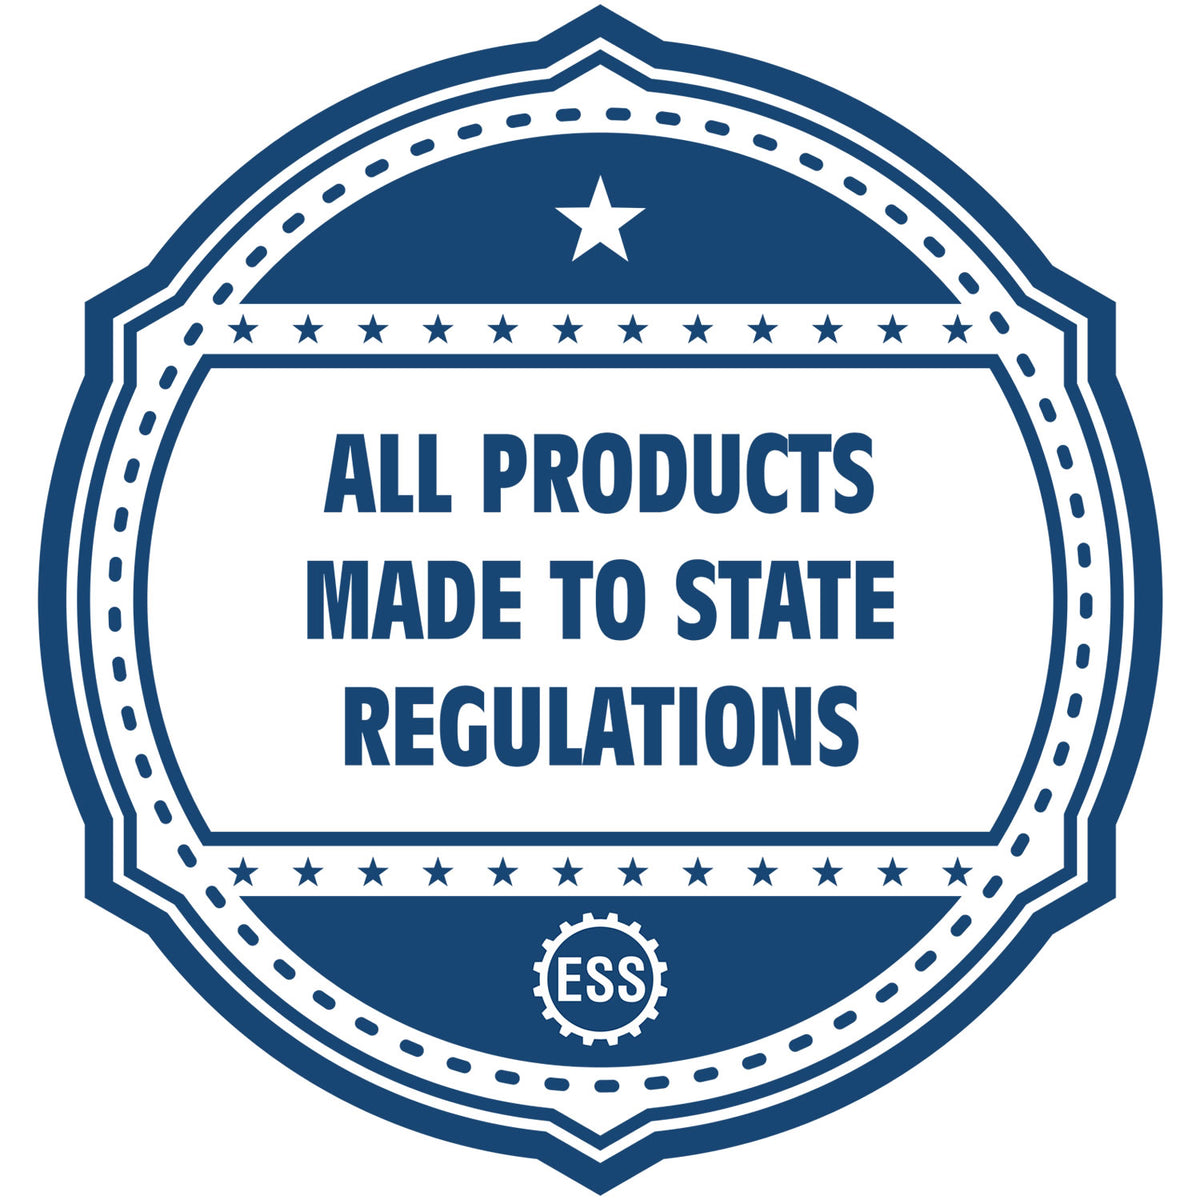 An icon or badge element for the Soft Pocket Nebraska Landscape Architect Embosser showing that this product is made in compliance with state regulations.